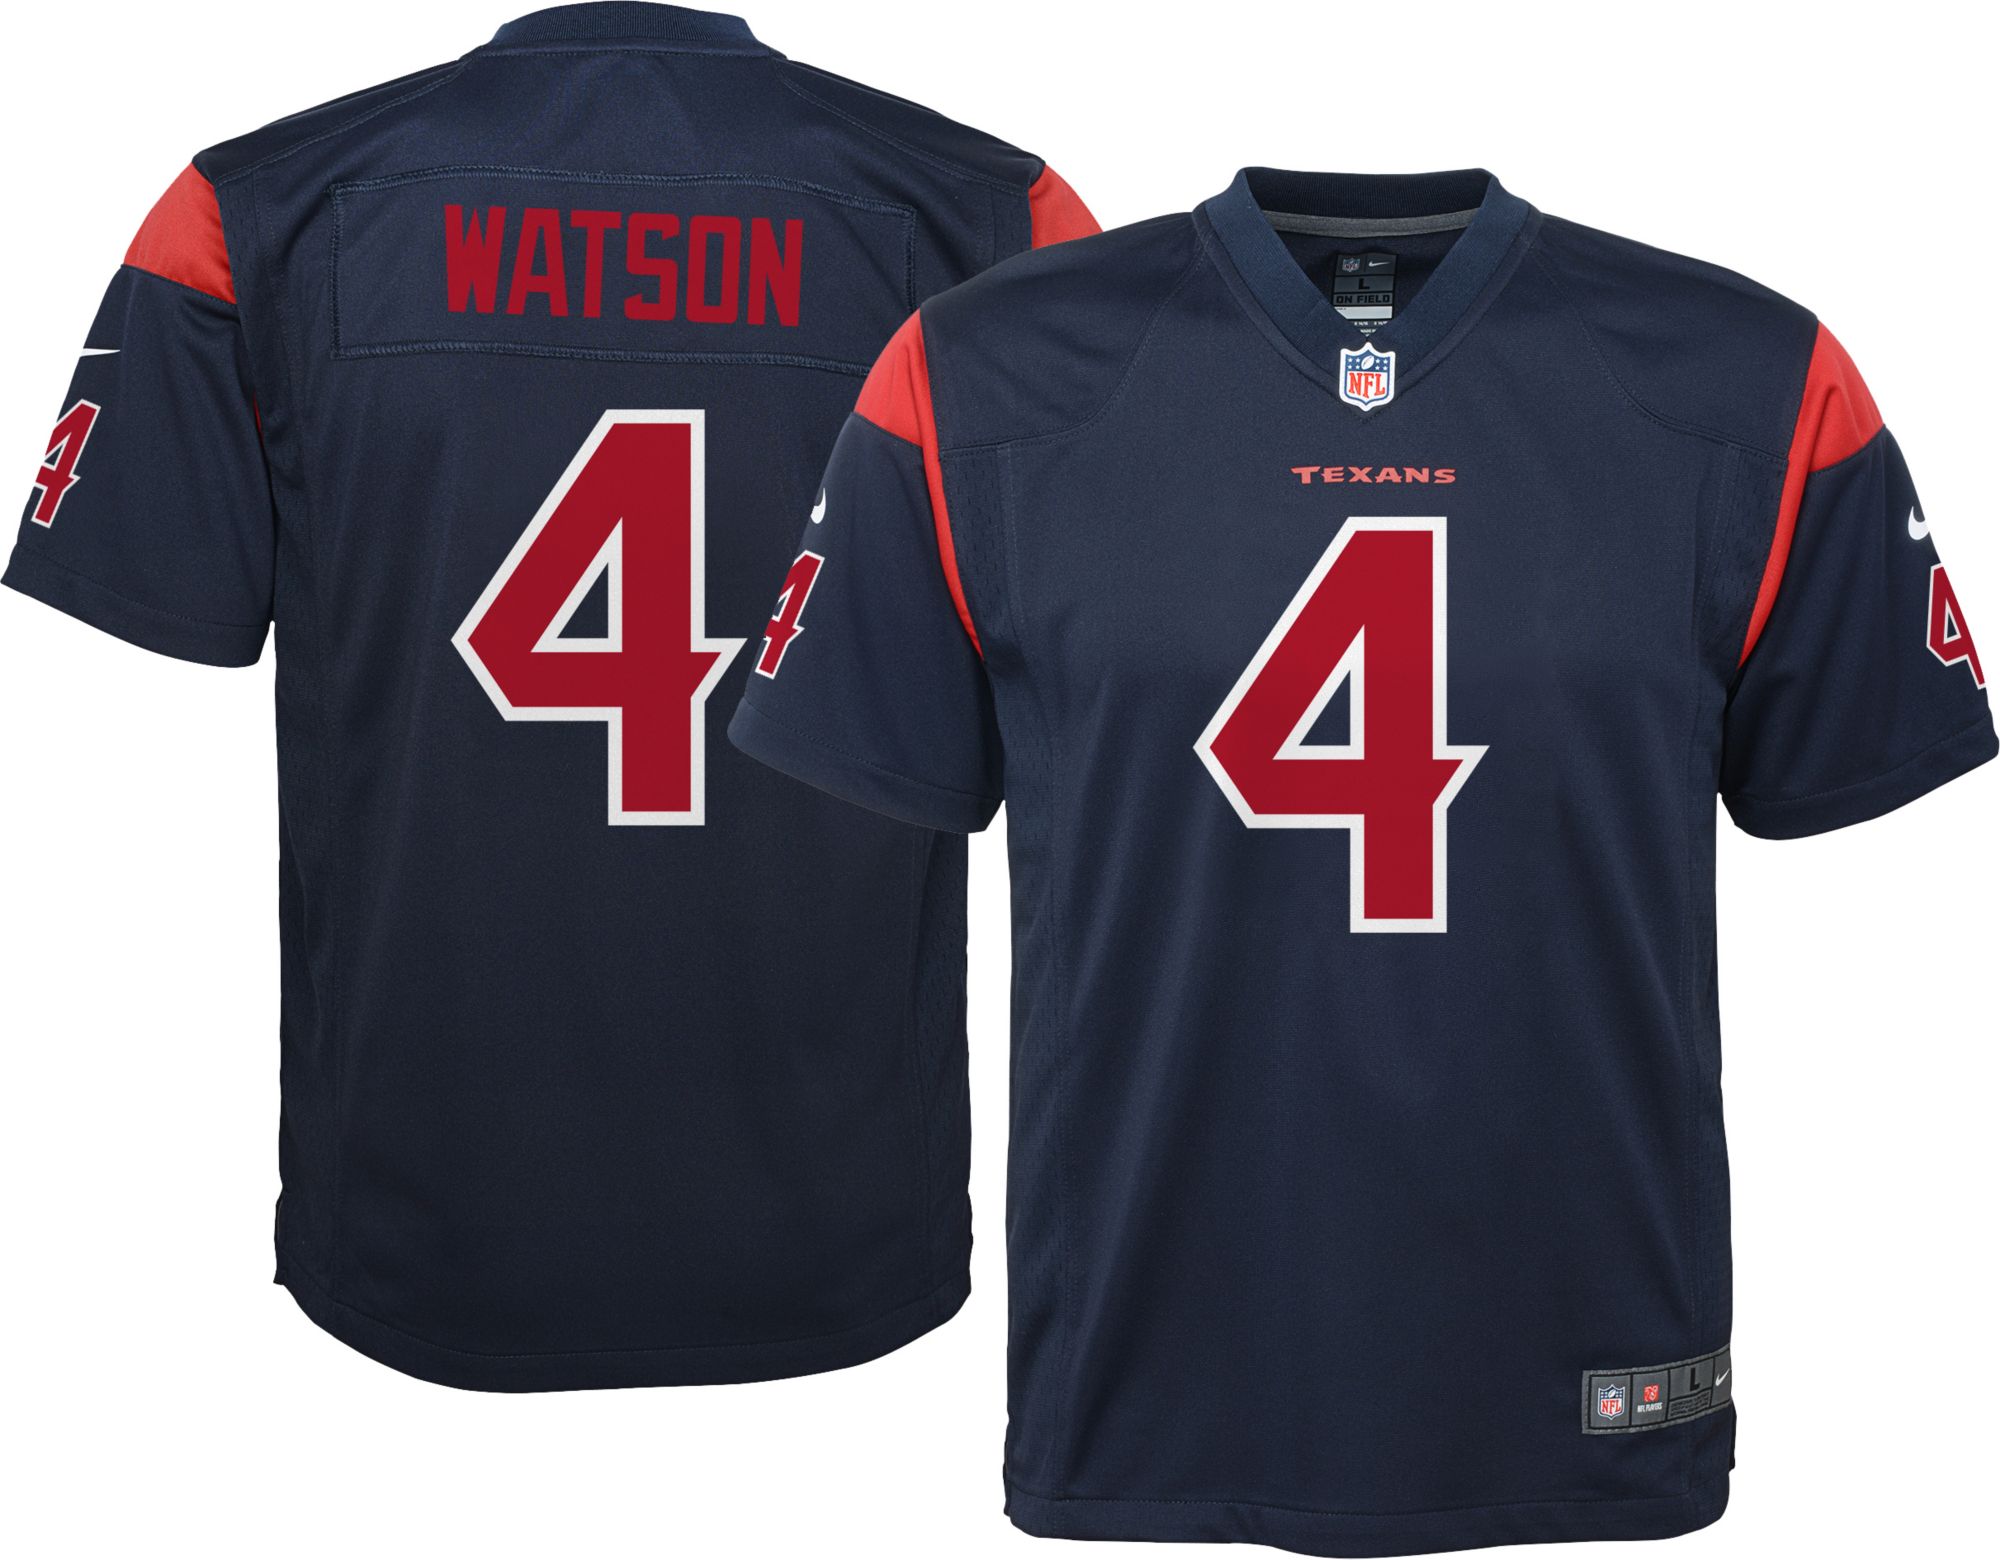 texans stitched jersey